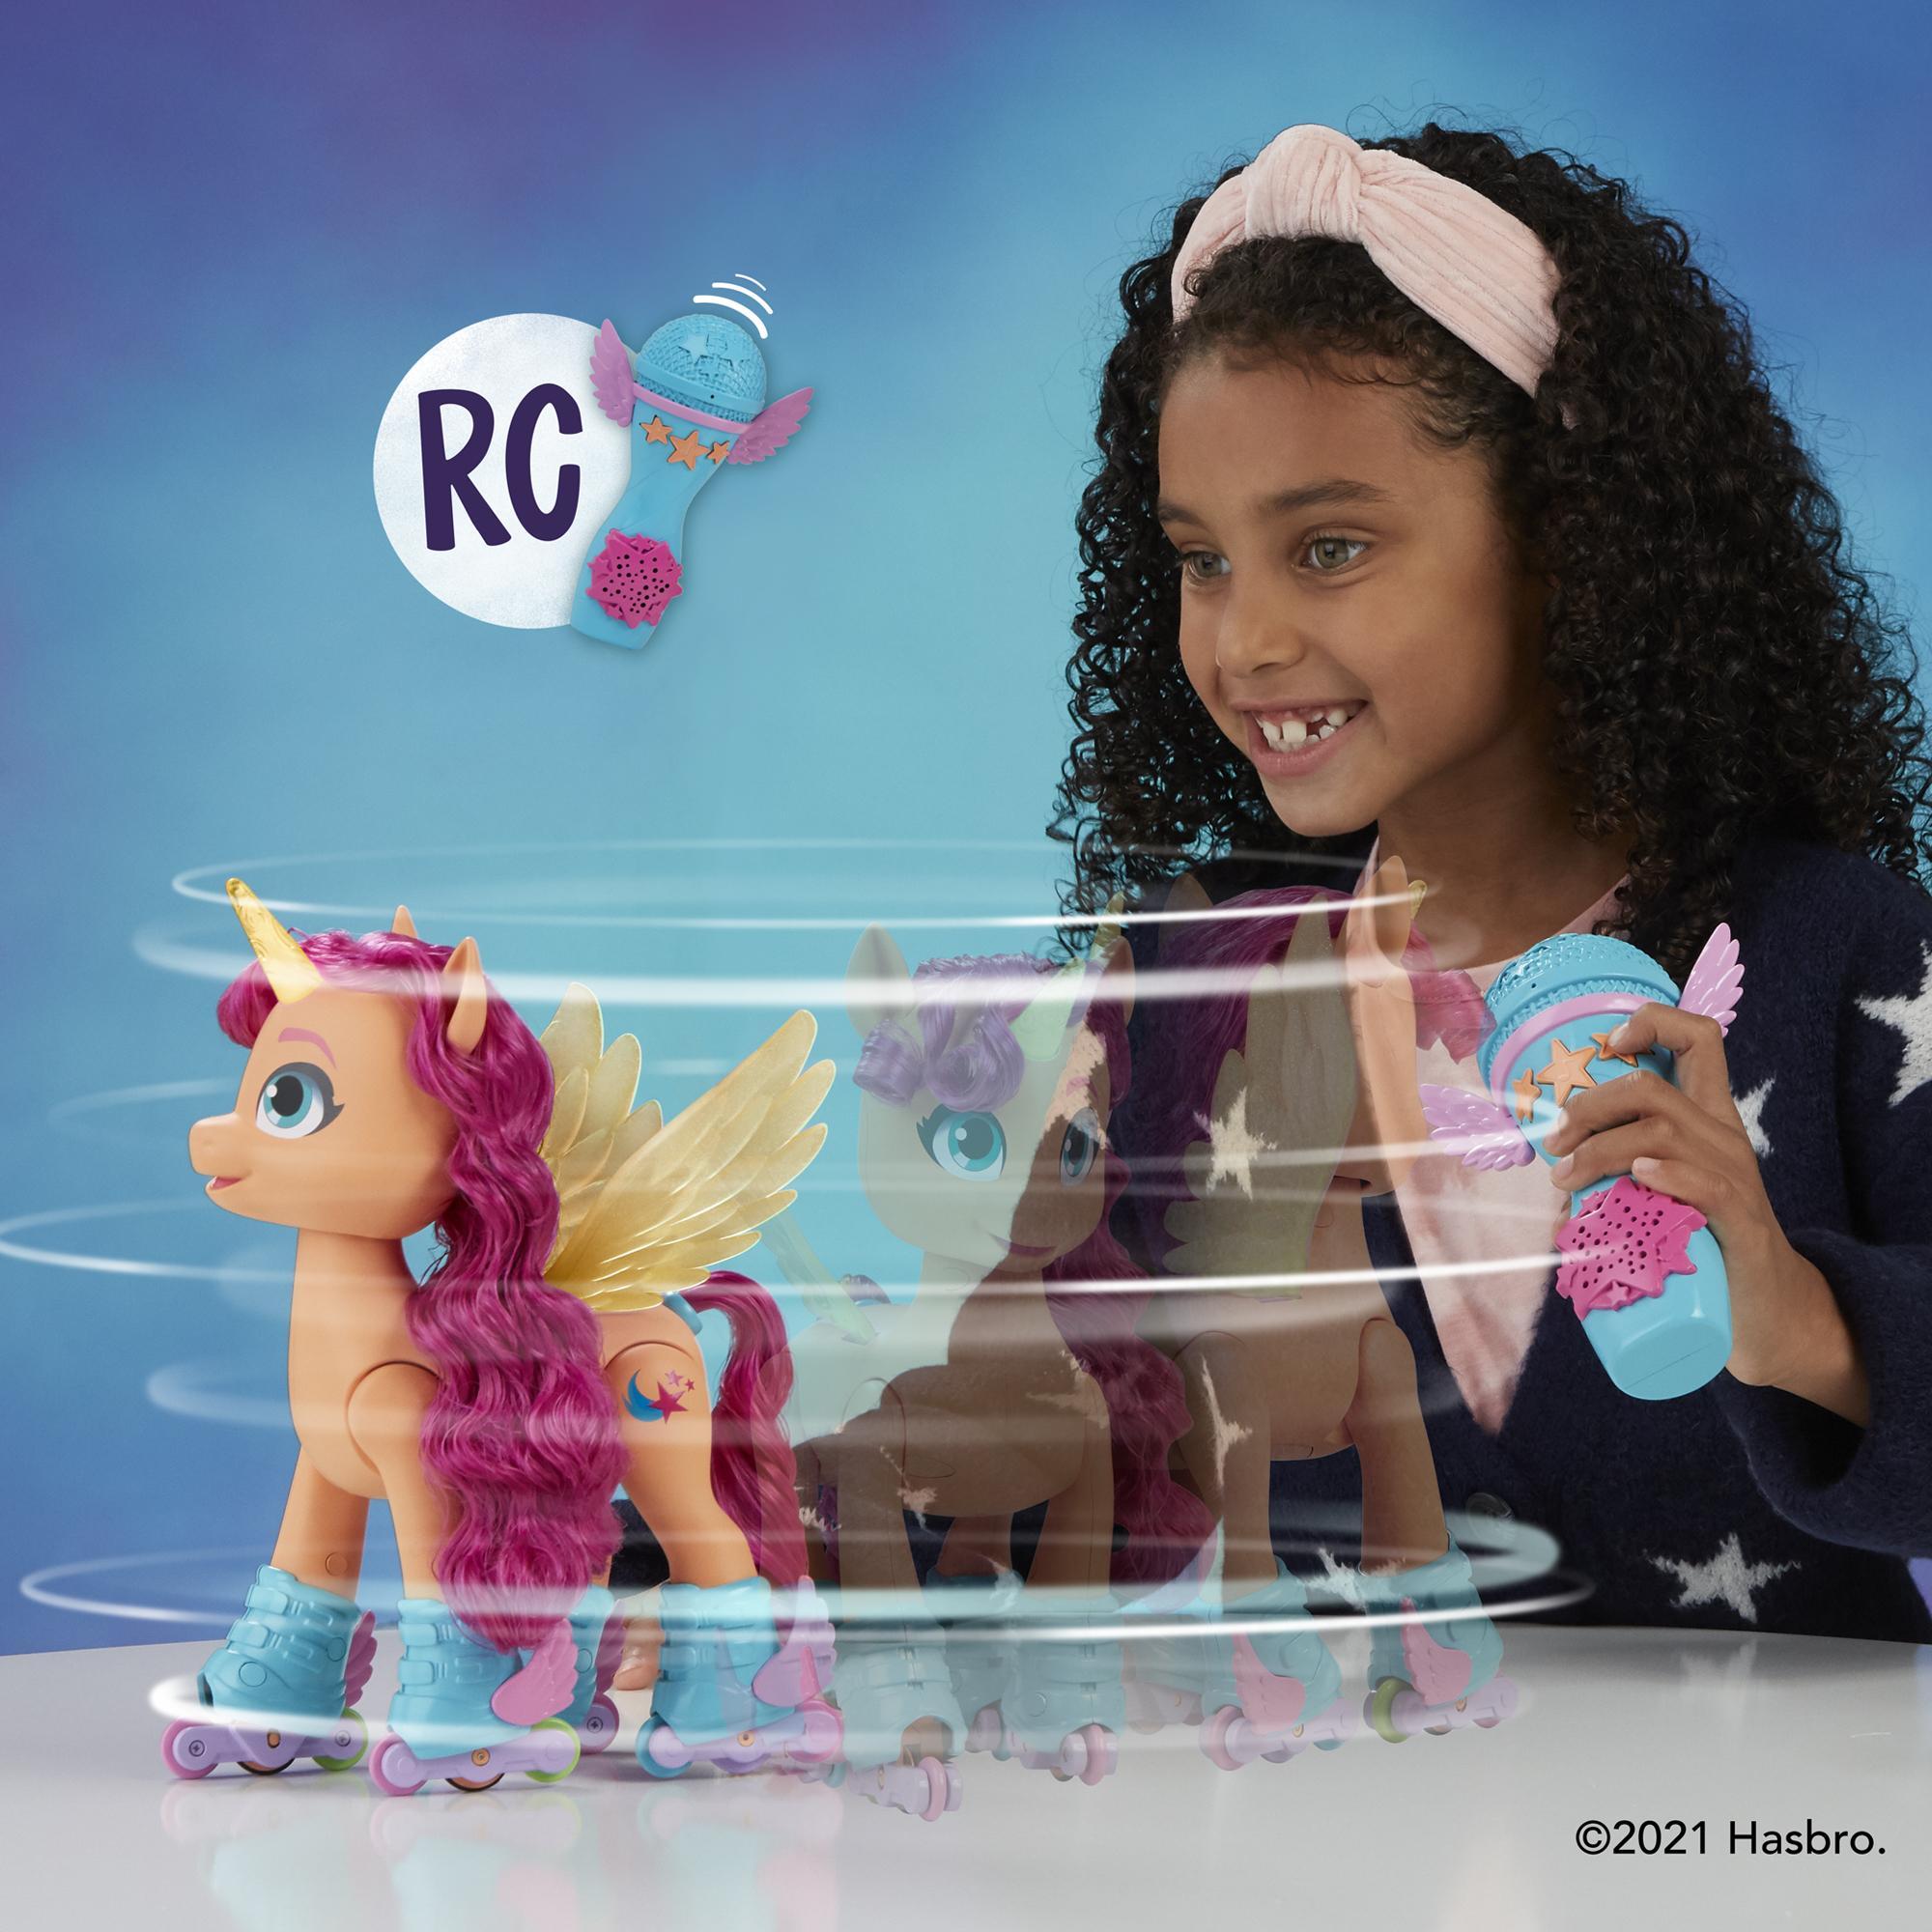 The Original 'My Little Pony' Toys are Back and Making Your